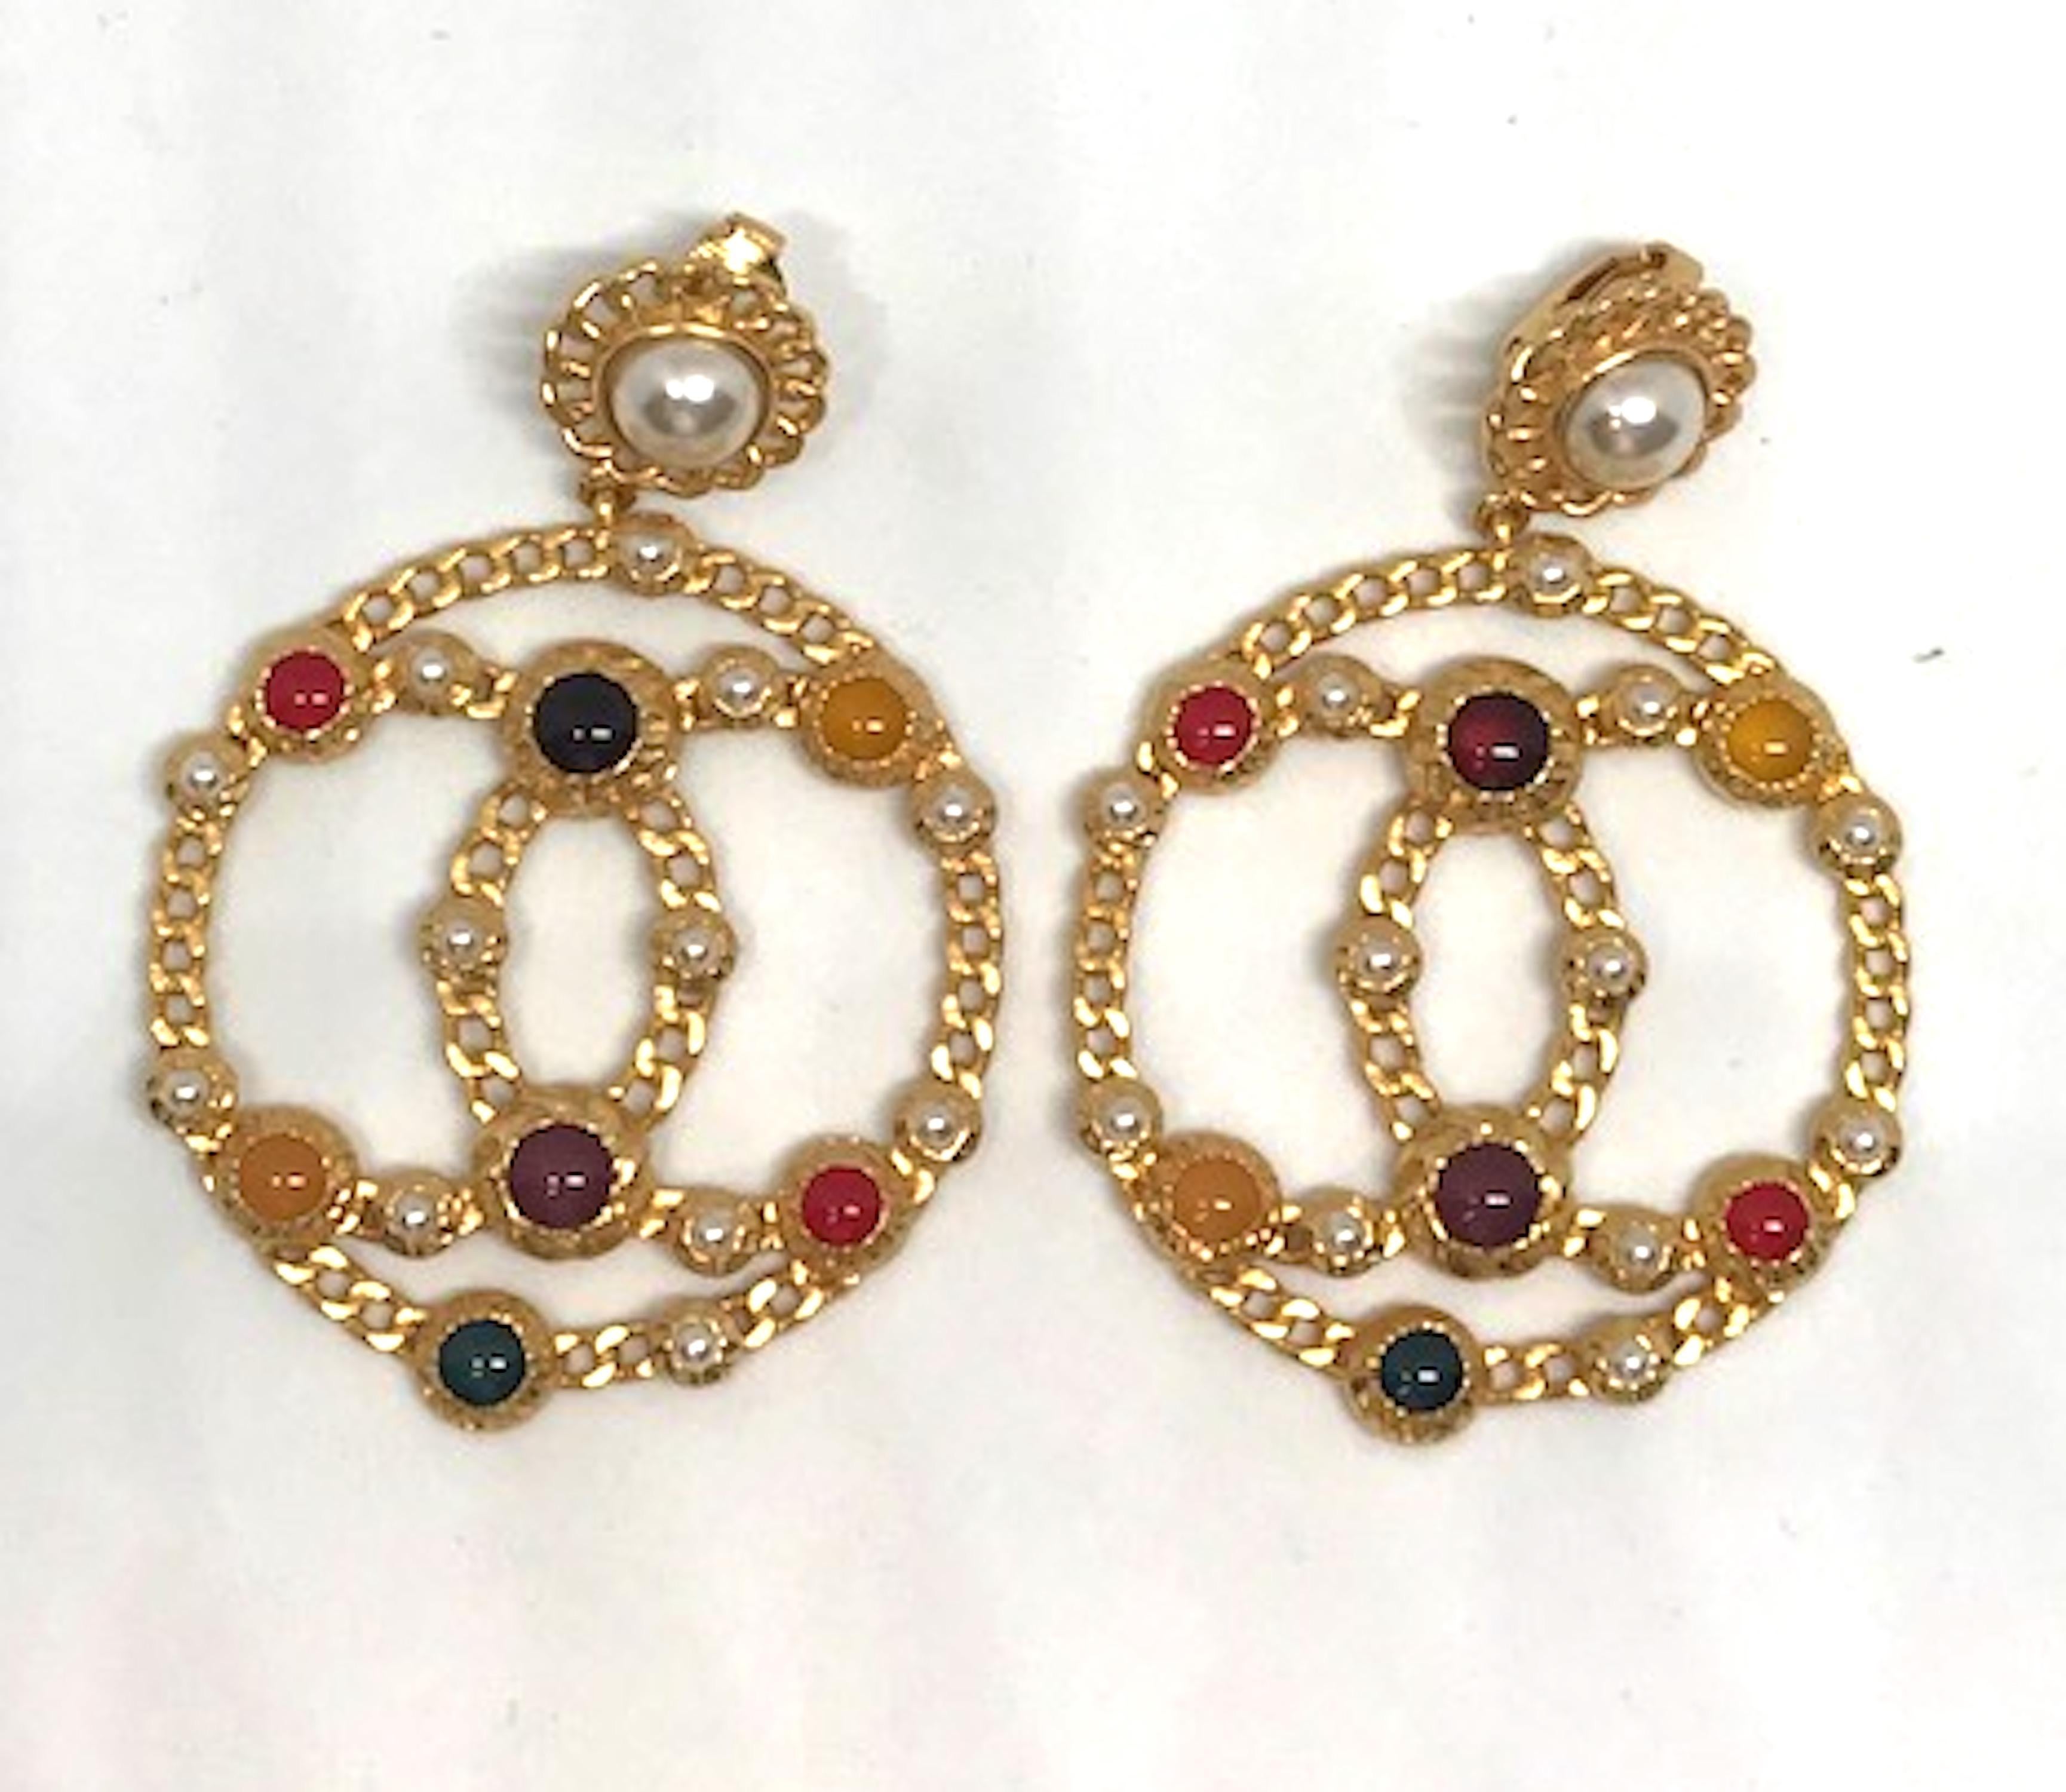 A lovely pair of Chanel gold tone, Gripoix glass cabochon and faux seed pearl earrings. The earrings feature Chanel's double CC logo in a circle suspended from a clip back pearl center button. All done in Chanel's famous gold chain design. The back